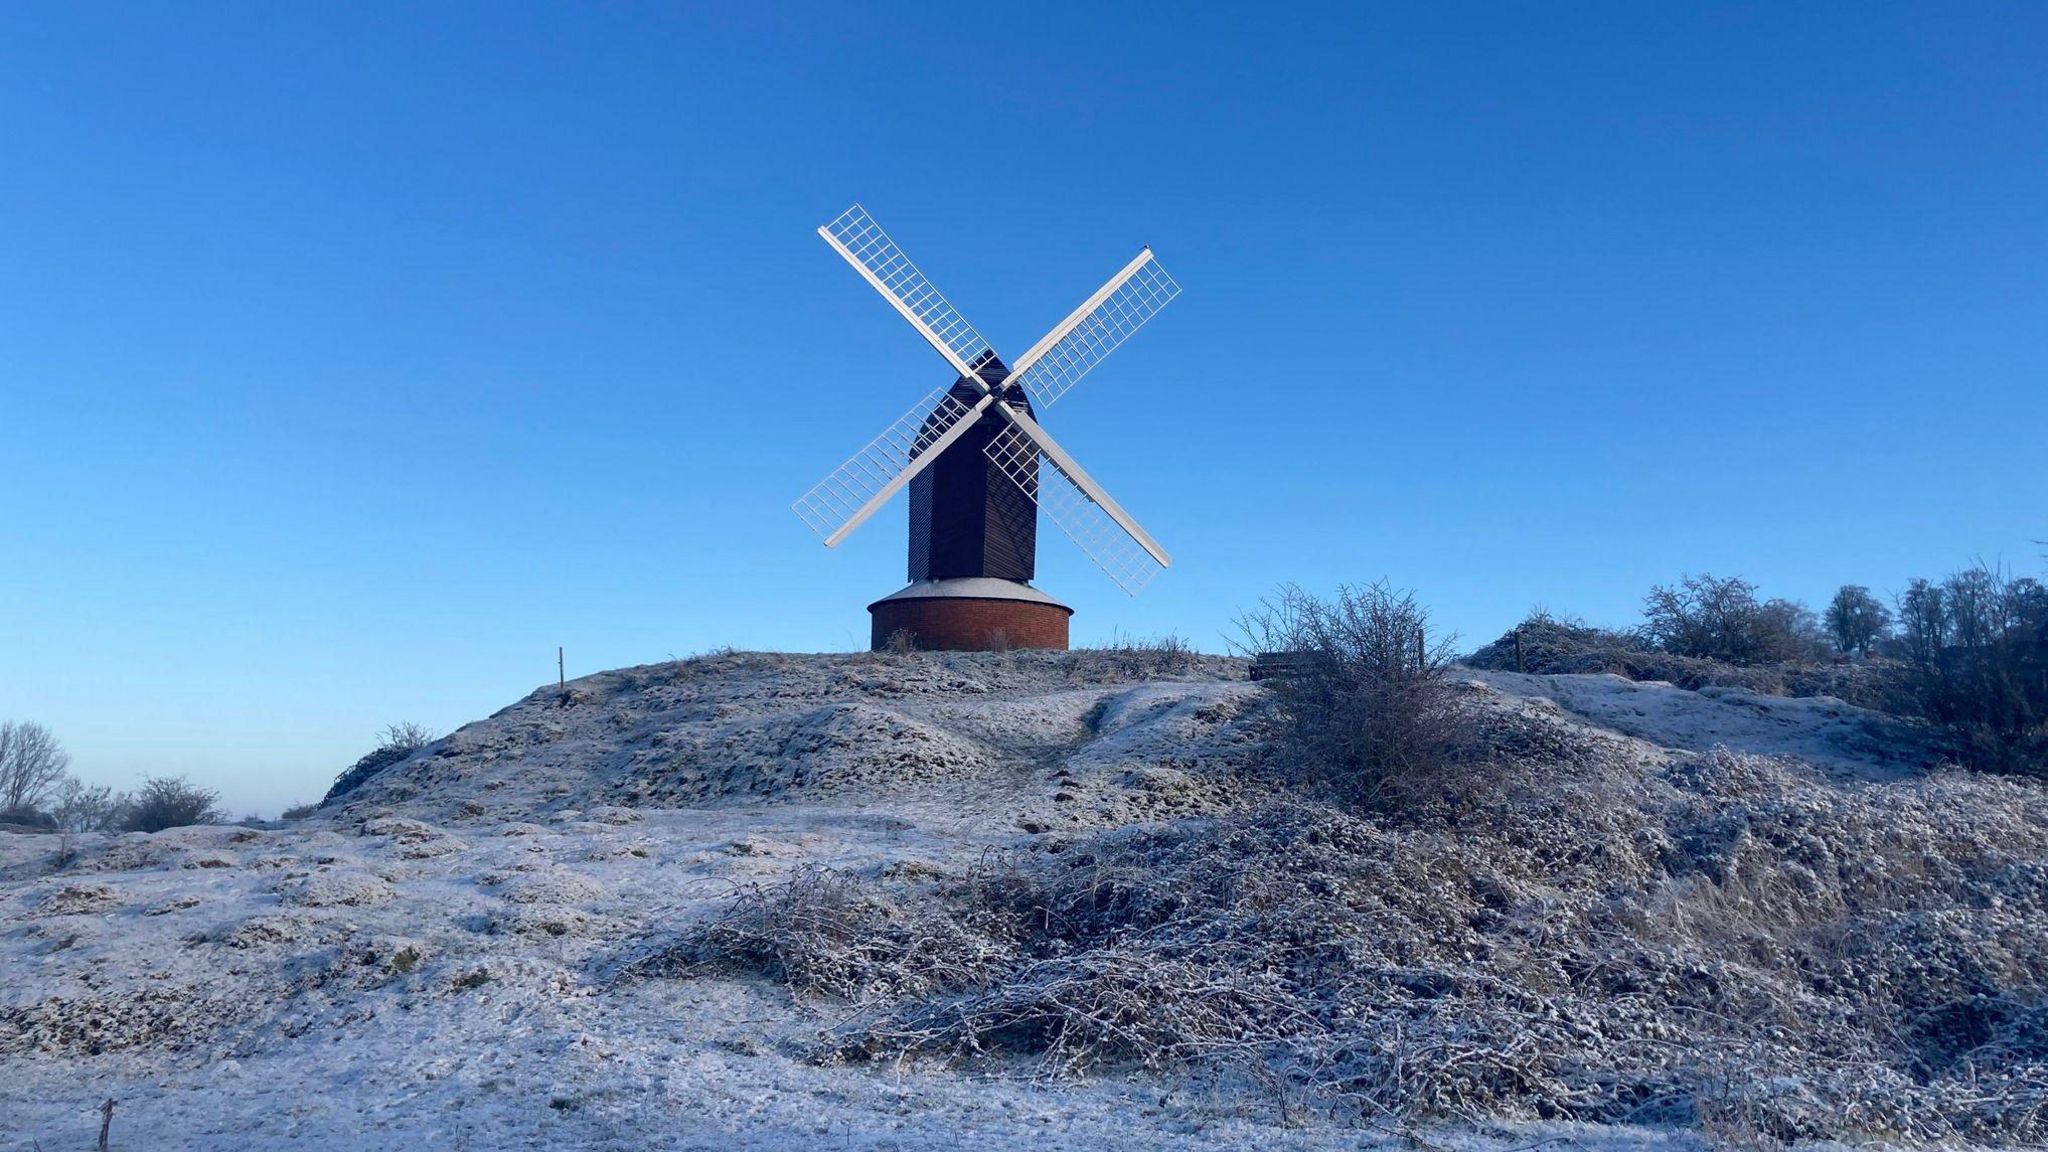 Brill Windmill standing on top of a frost covered hill on a bright blue day